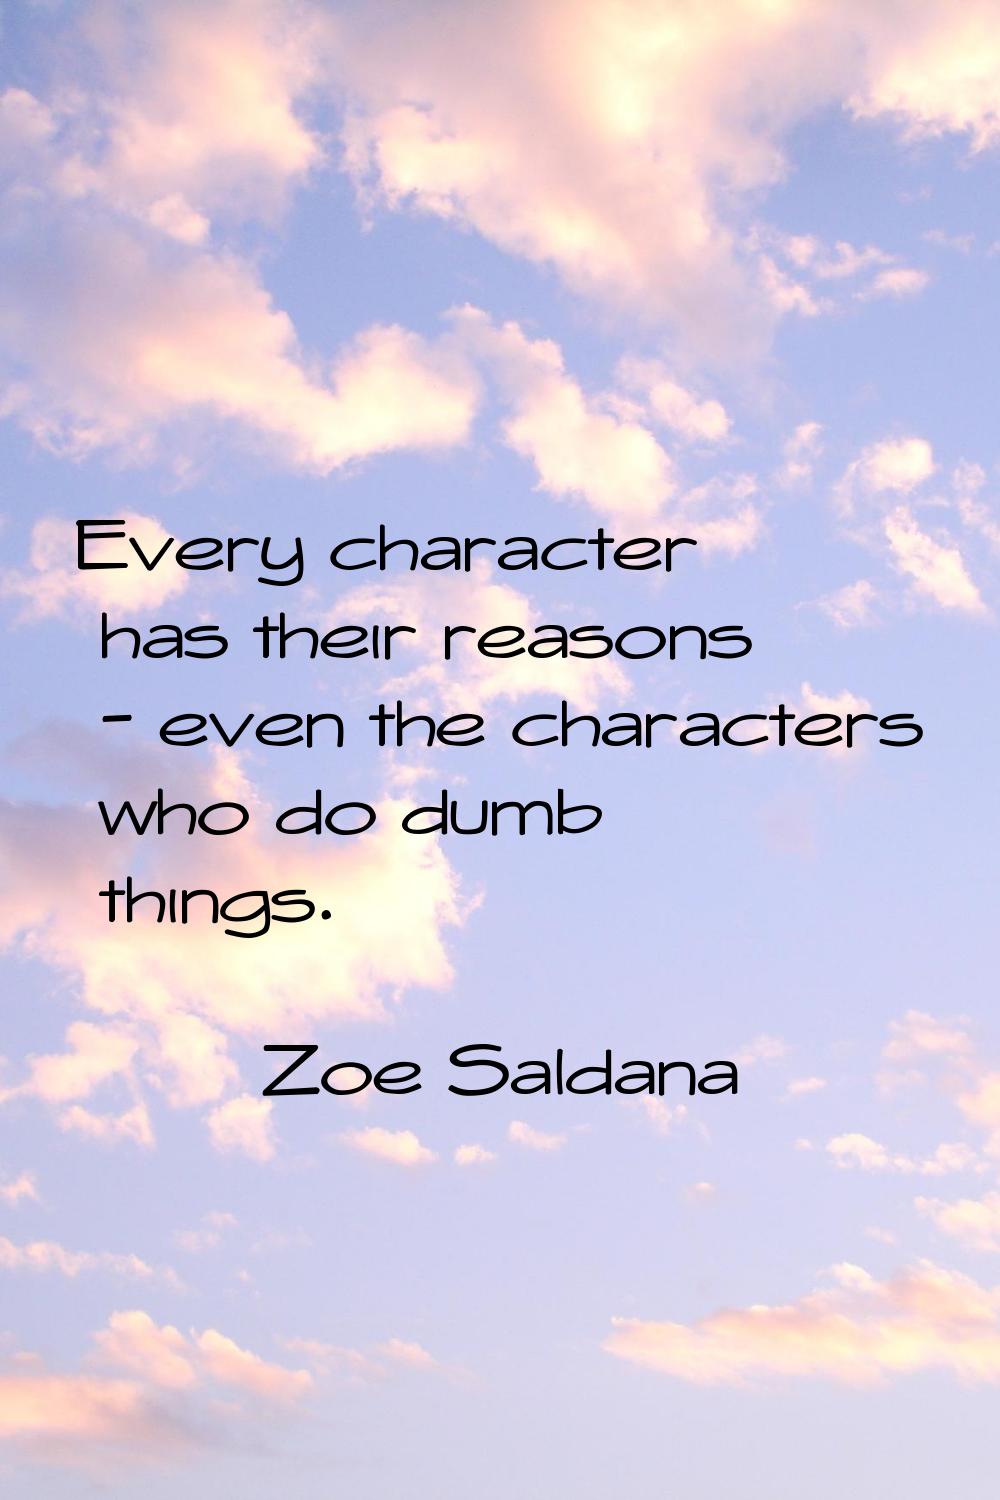 Every character has their reasons - even the characters who do dumb things.